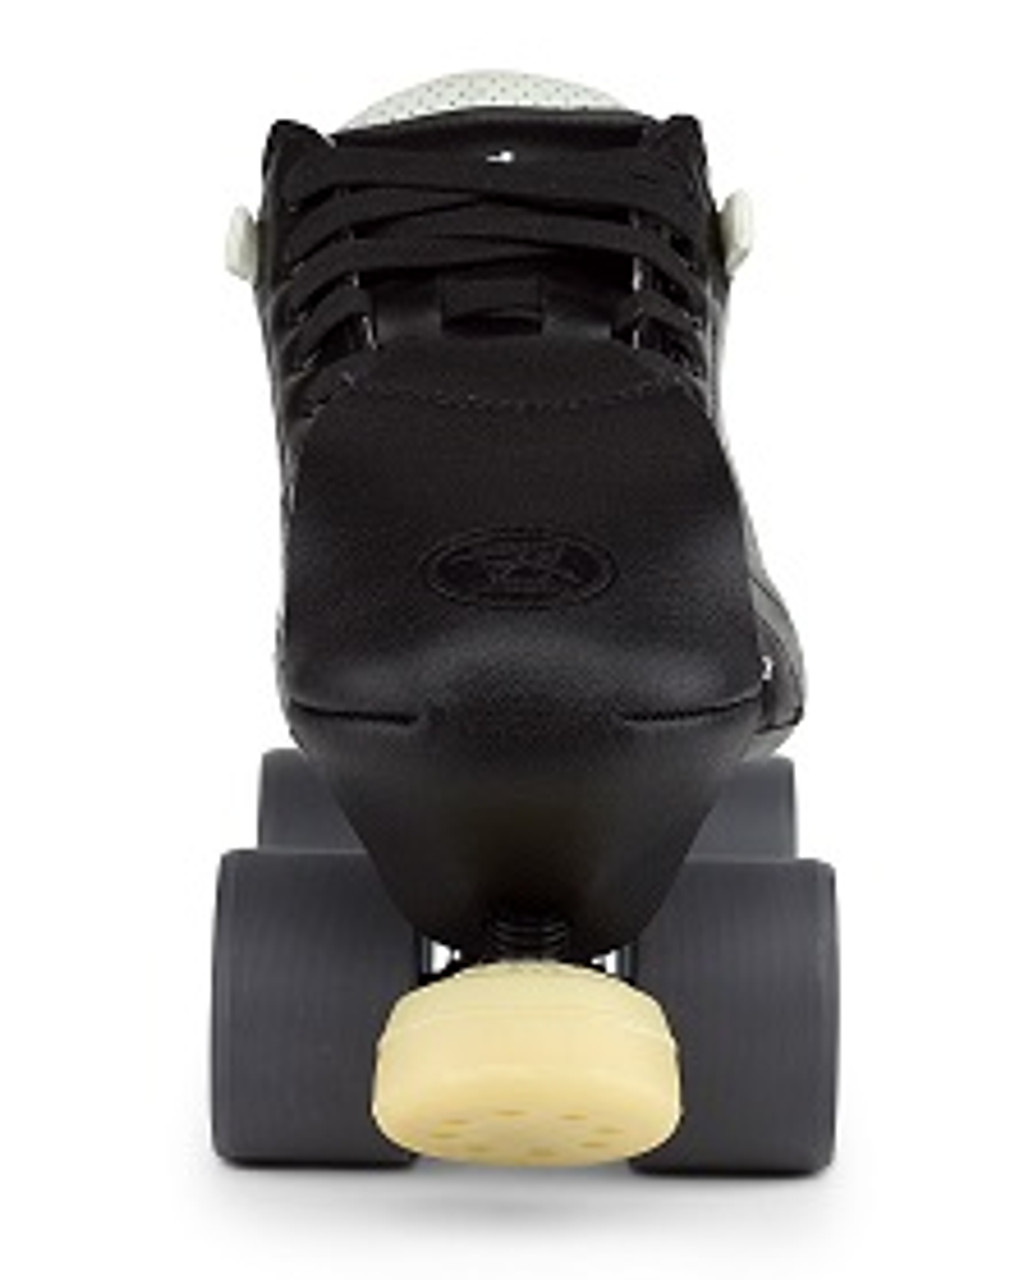 Riedell Tuff Toe Skate Protection